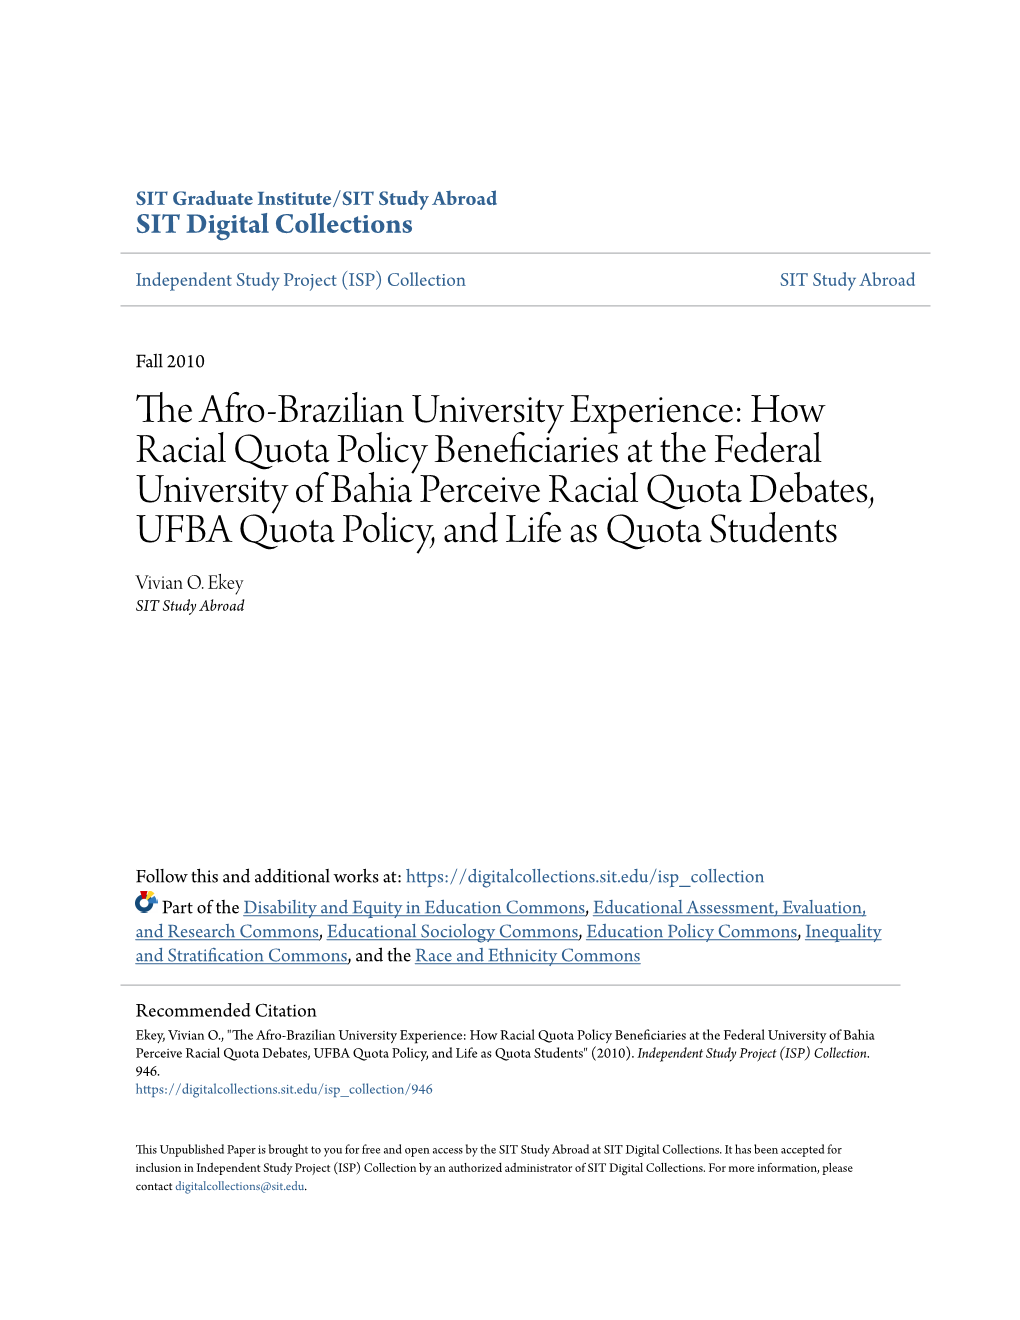 How Racial Quota Policy Beneficiaries at the Federal University of Bahia Perceive Racial Quota Debates, UFBA Quota Policy, and Life As Quota Students Vivian O